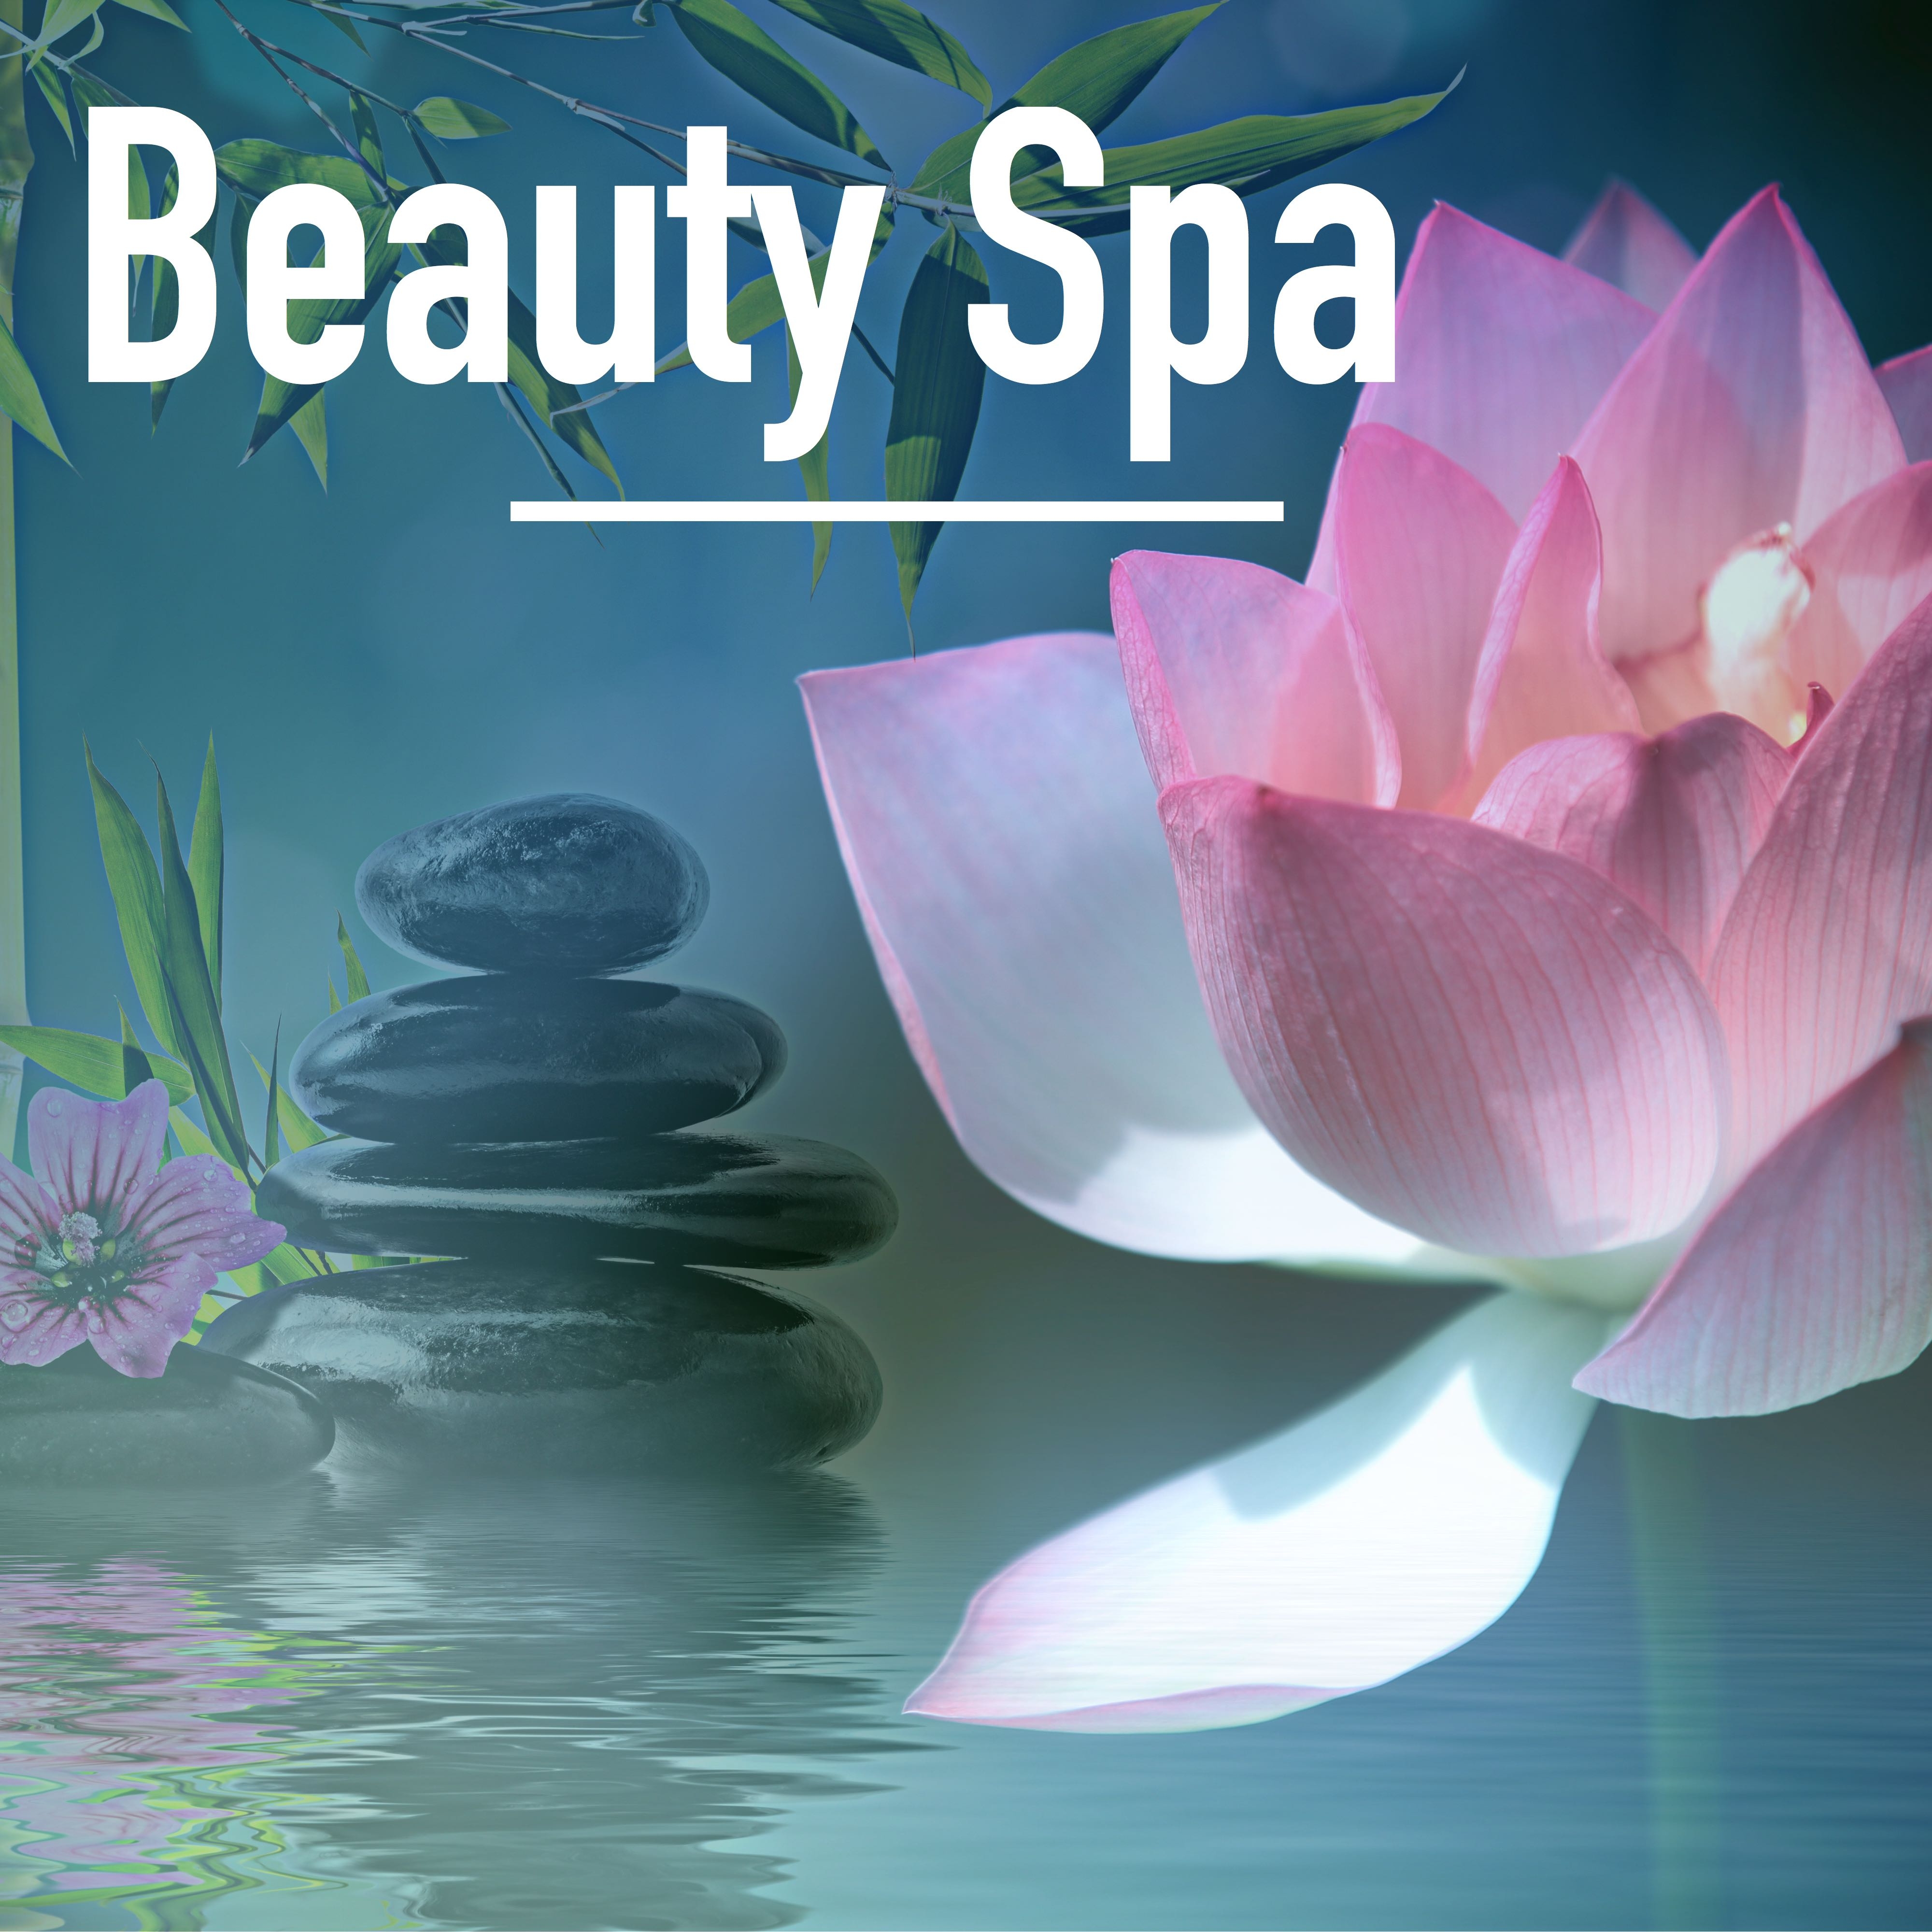 Beauty Spa Music - Best 33 Relaxing Songs Collection for Massage Therapy and Salon with Soothing Sounds of Nature